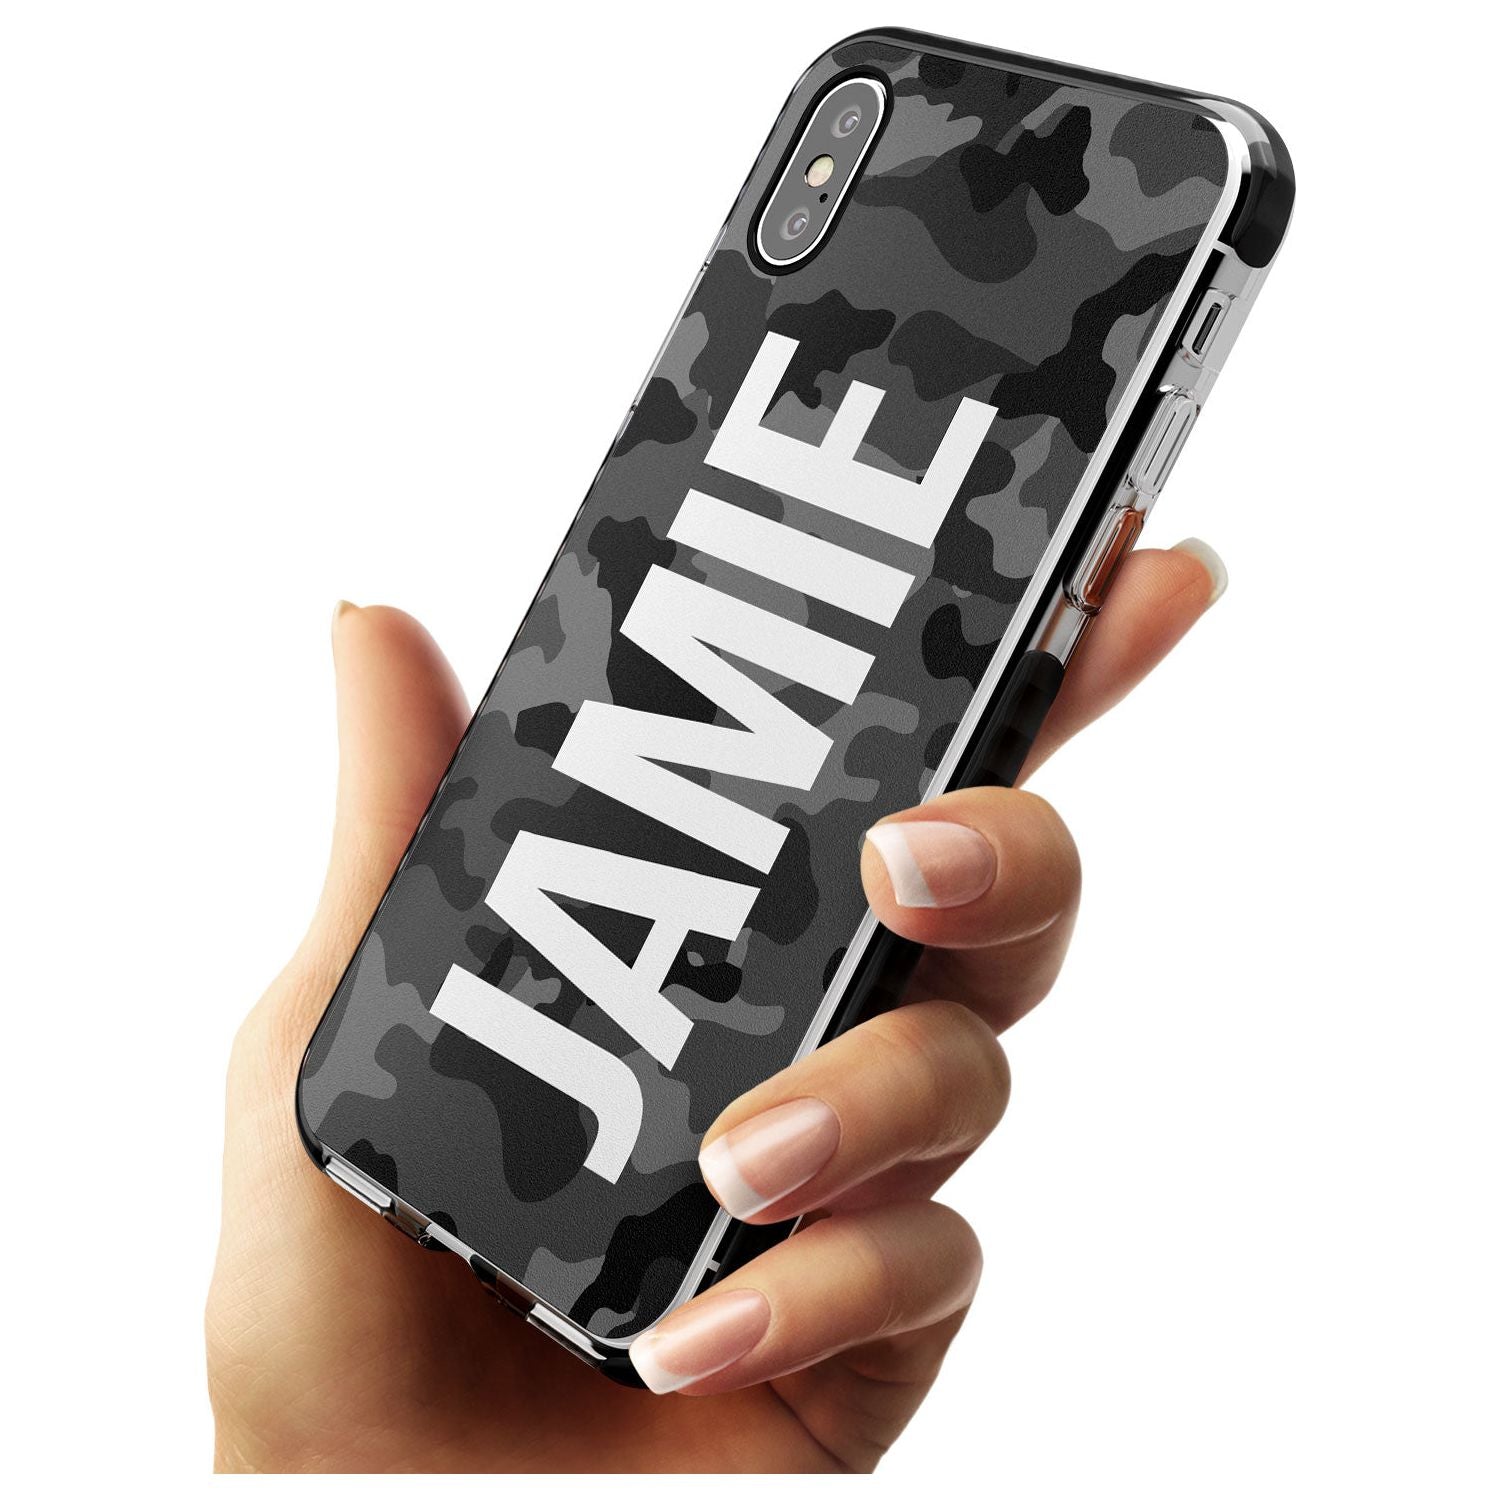 Vertical Name Personalised Black Camouflage Black Impact Phone Case for iPhone X XS Max XR